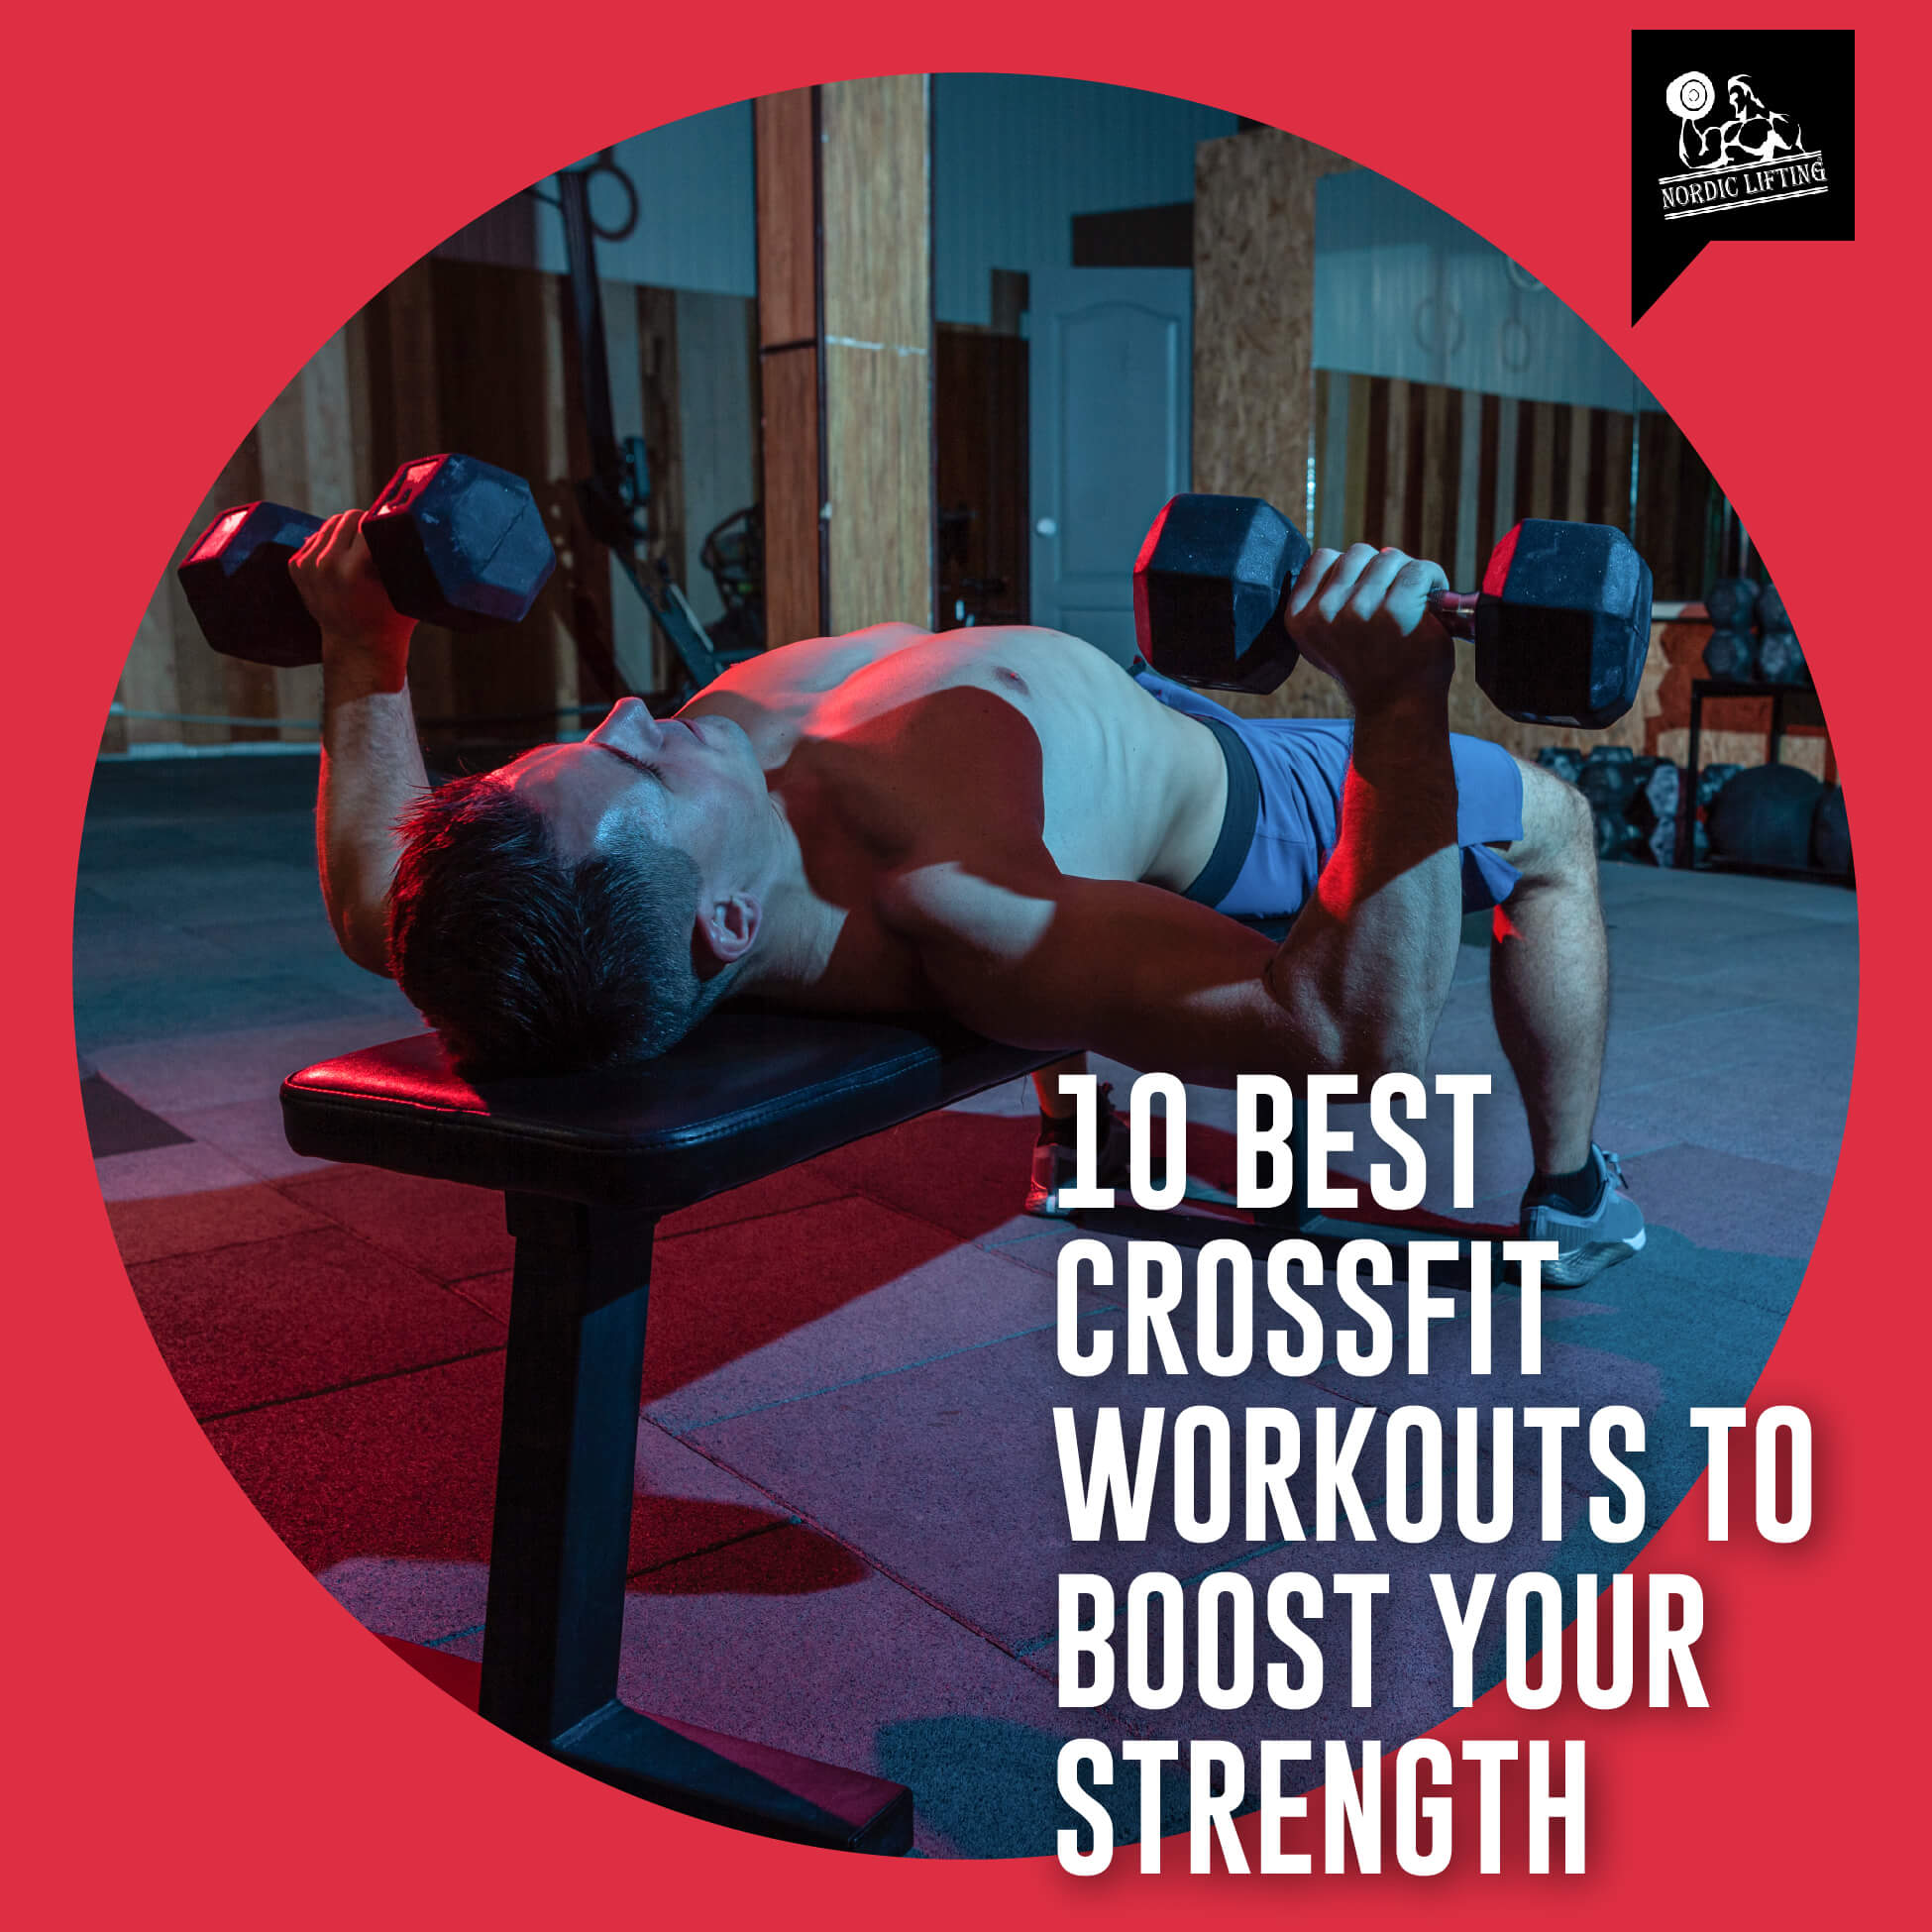 CrossFit is the perfect mode of exercise to increase reliance, mental toug…   Crossfit workouts for beginners, Crossfit workouts at home, Bodyweight  workout routine